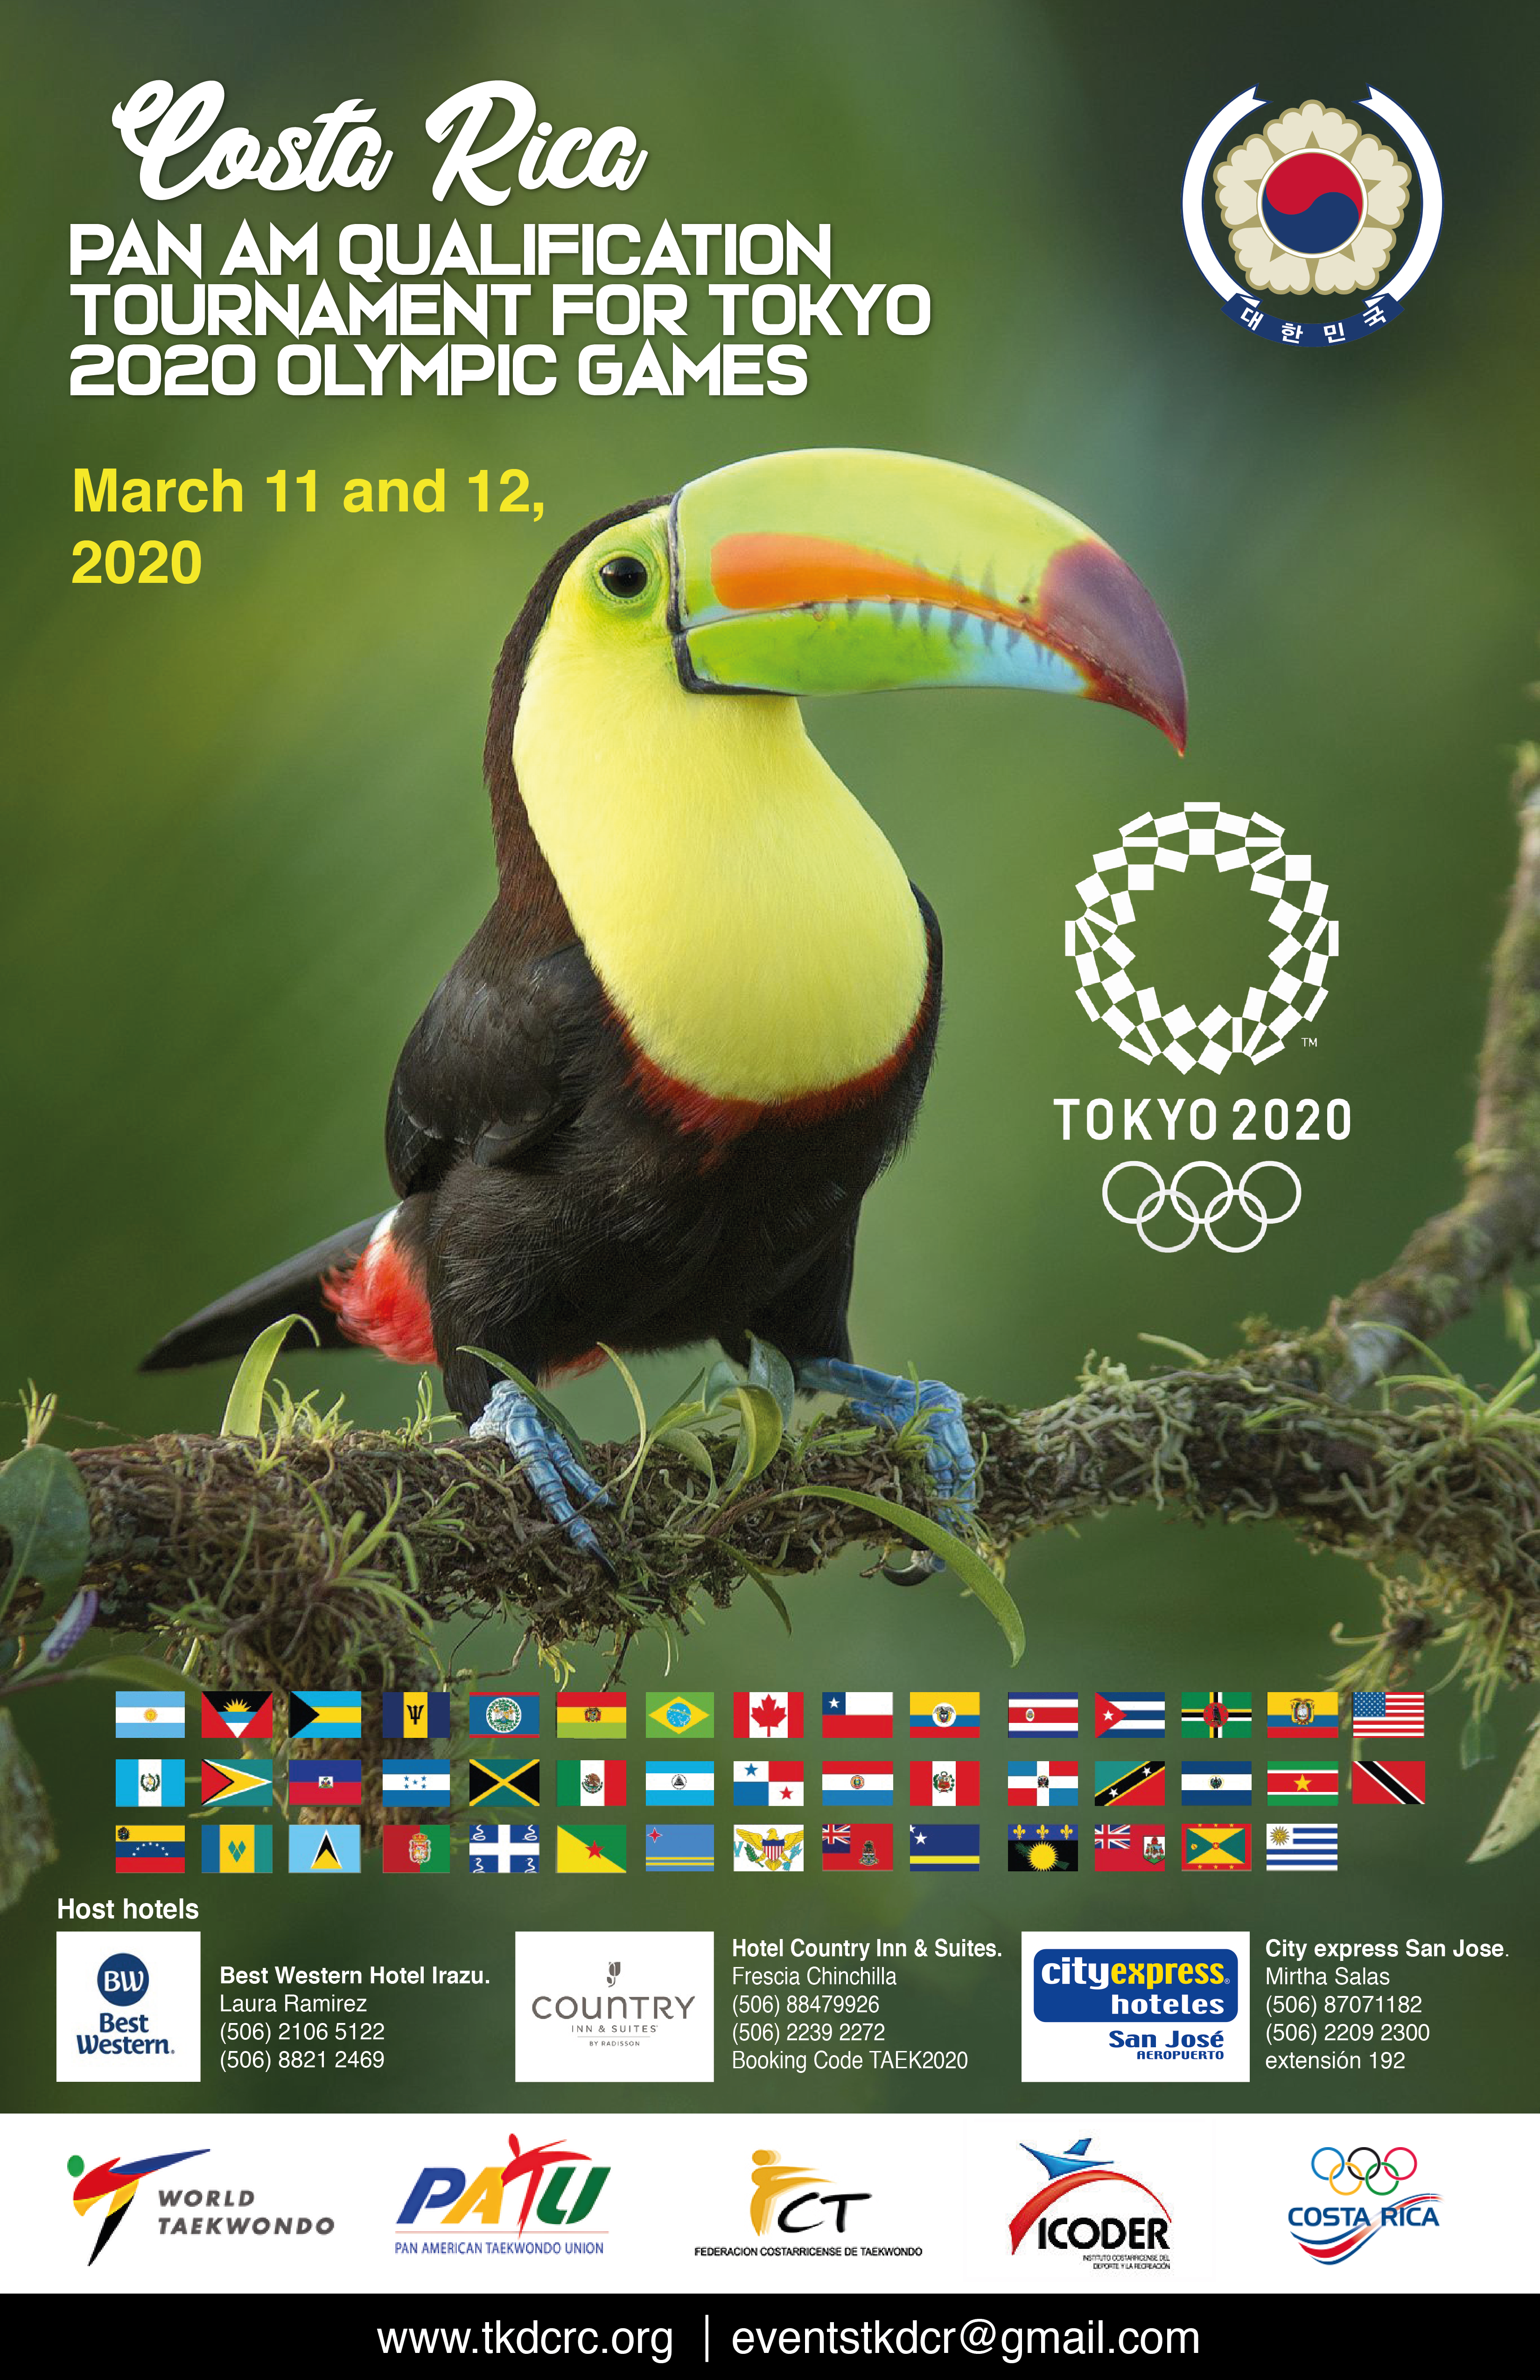 POSTER_Pan-Am-Qualification-Tournament-for-Tokyo-2020-Olympic-Games